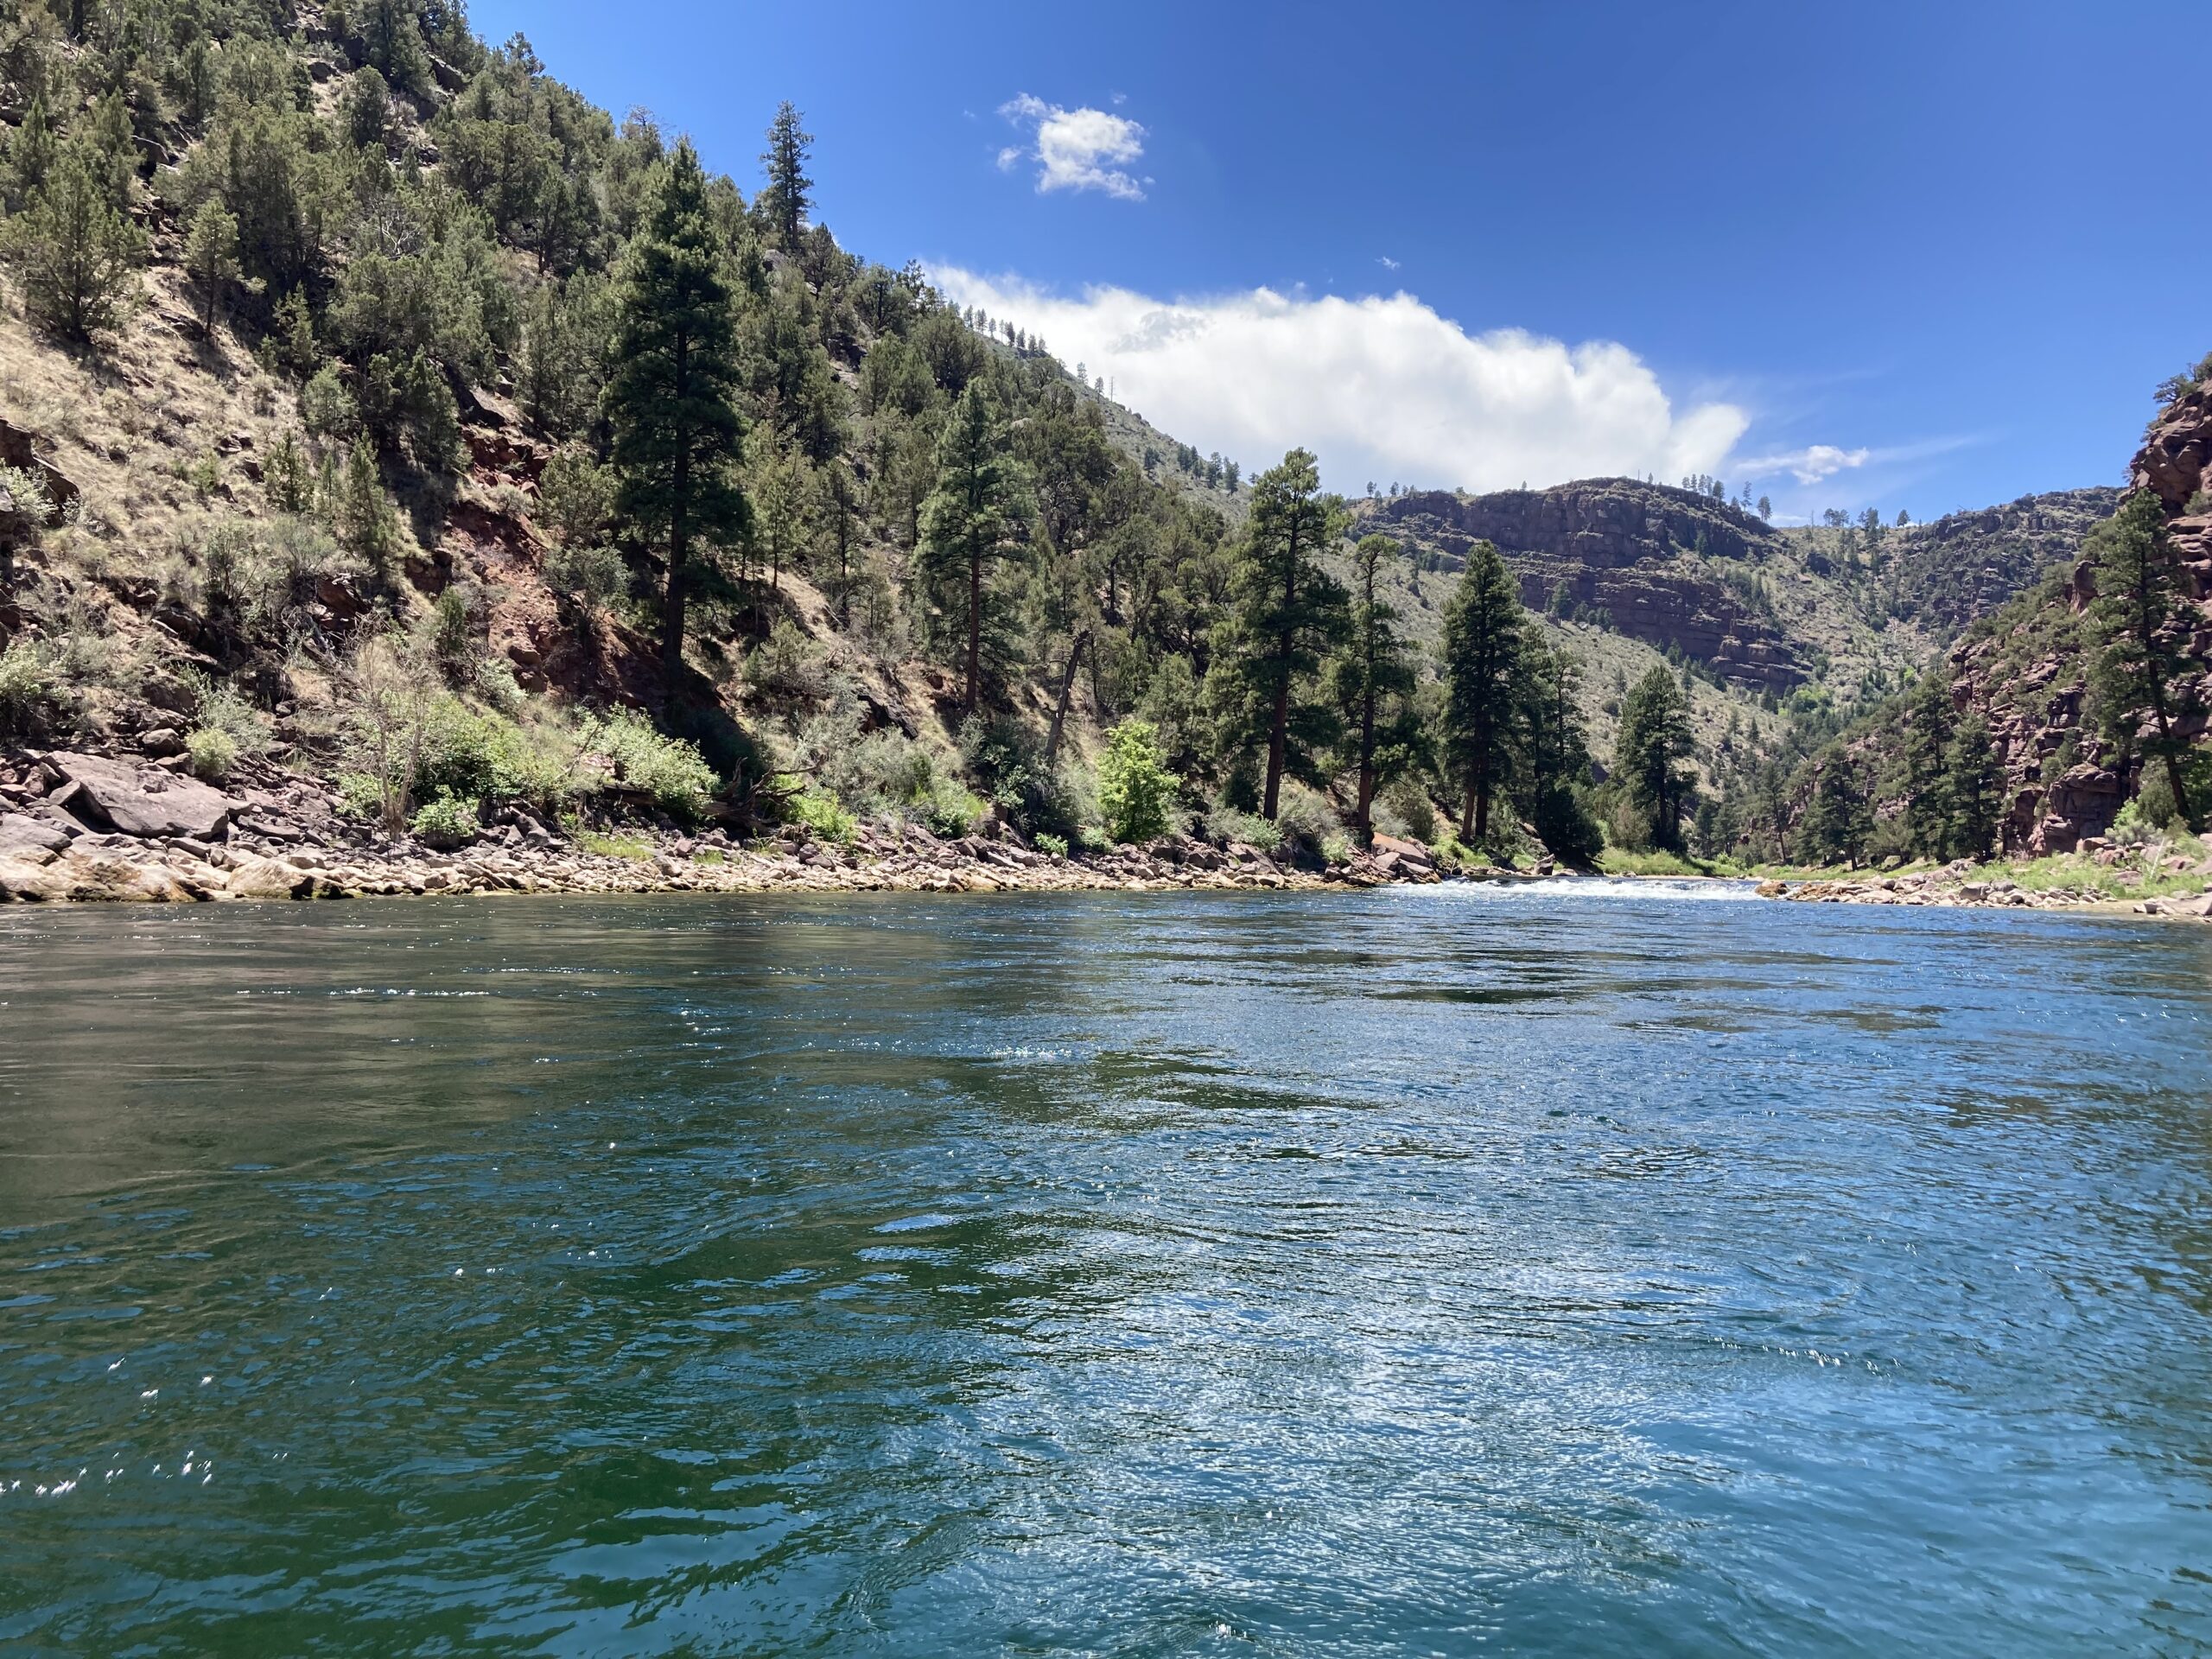 The Green River below Flaming Gorge Dam. Taken July 4, 2021. Credit Lisa Winters, Grand Canyon Trust.